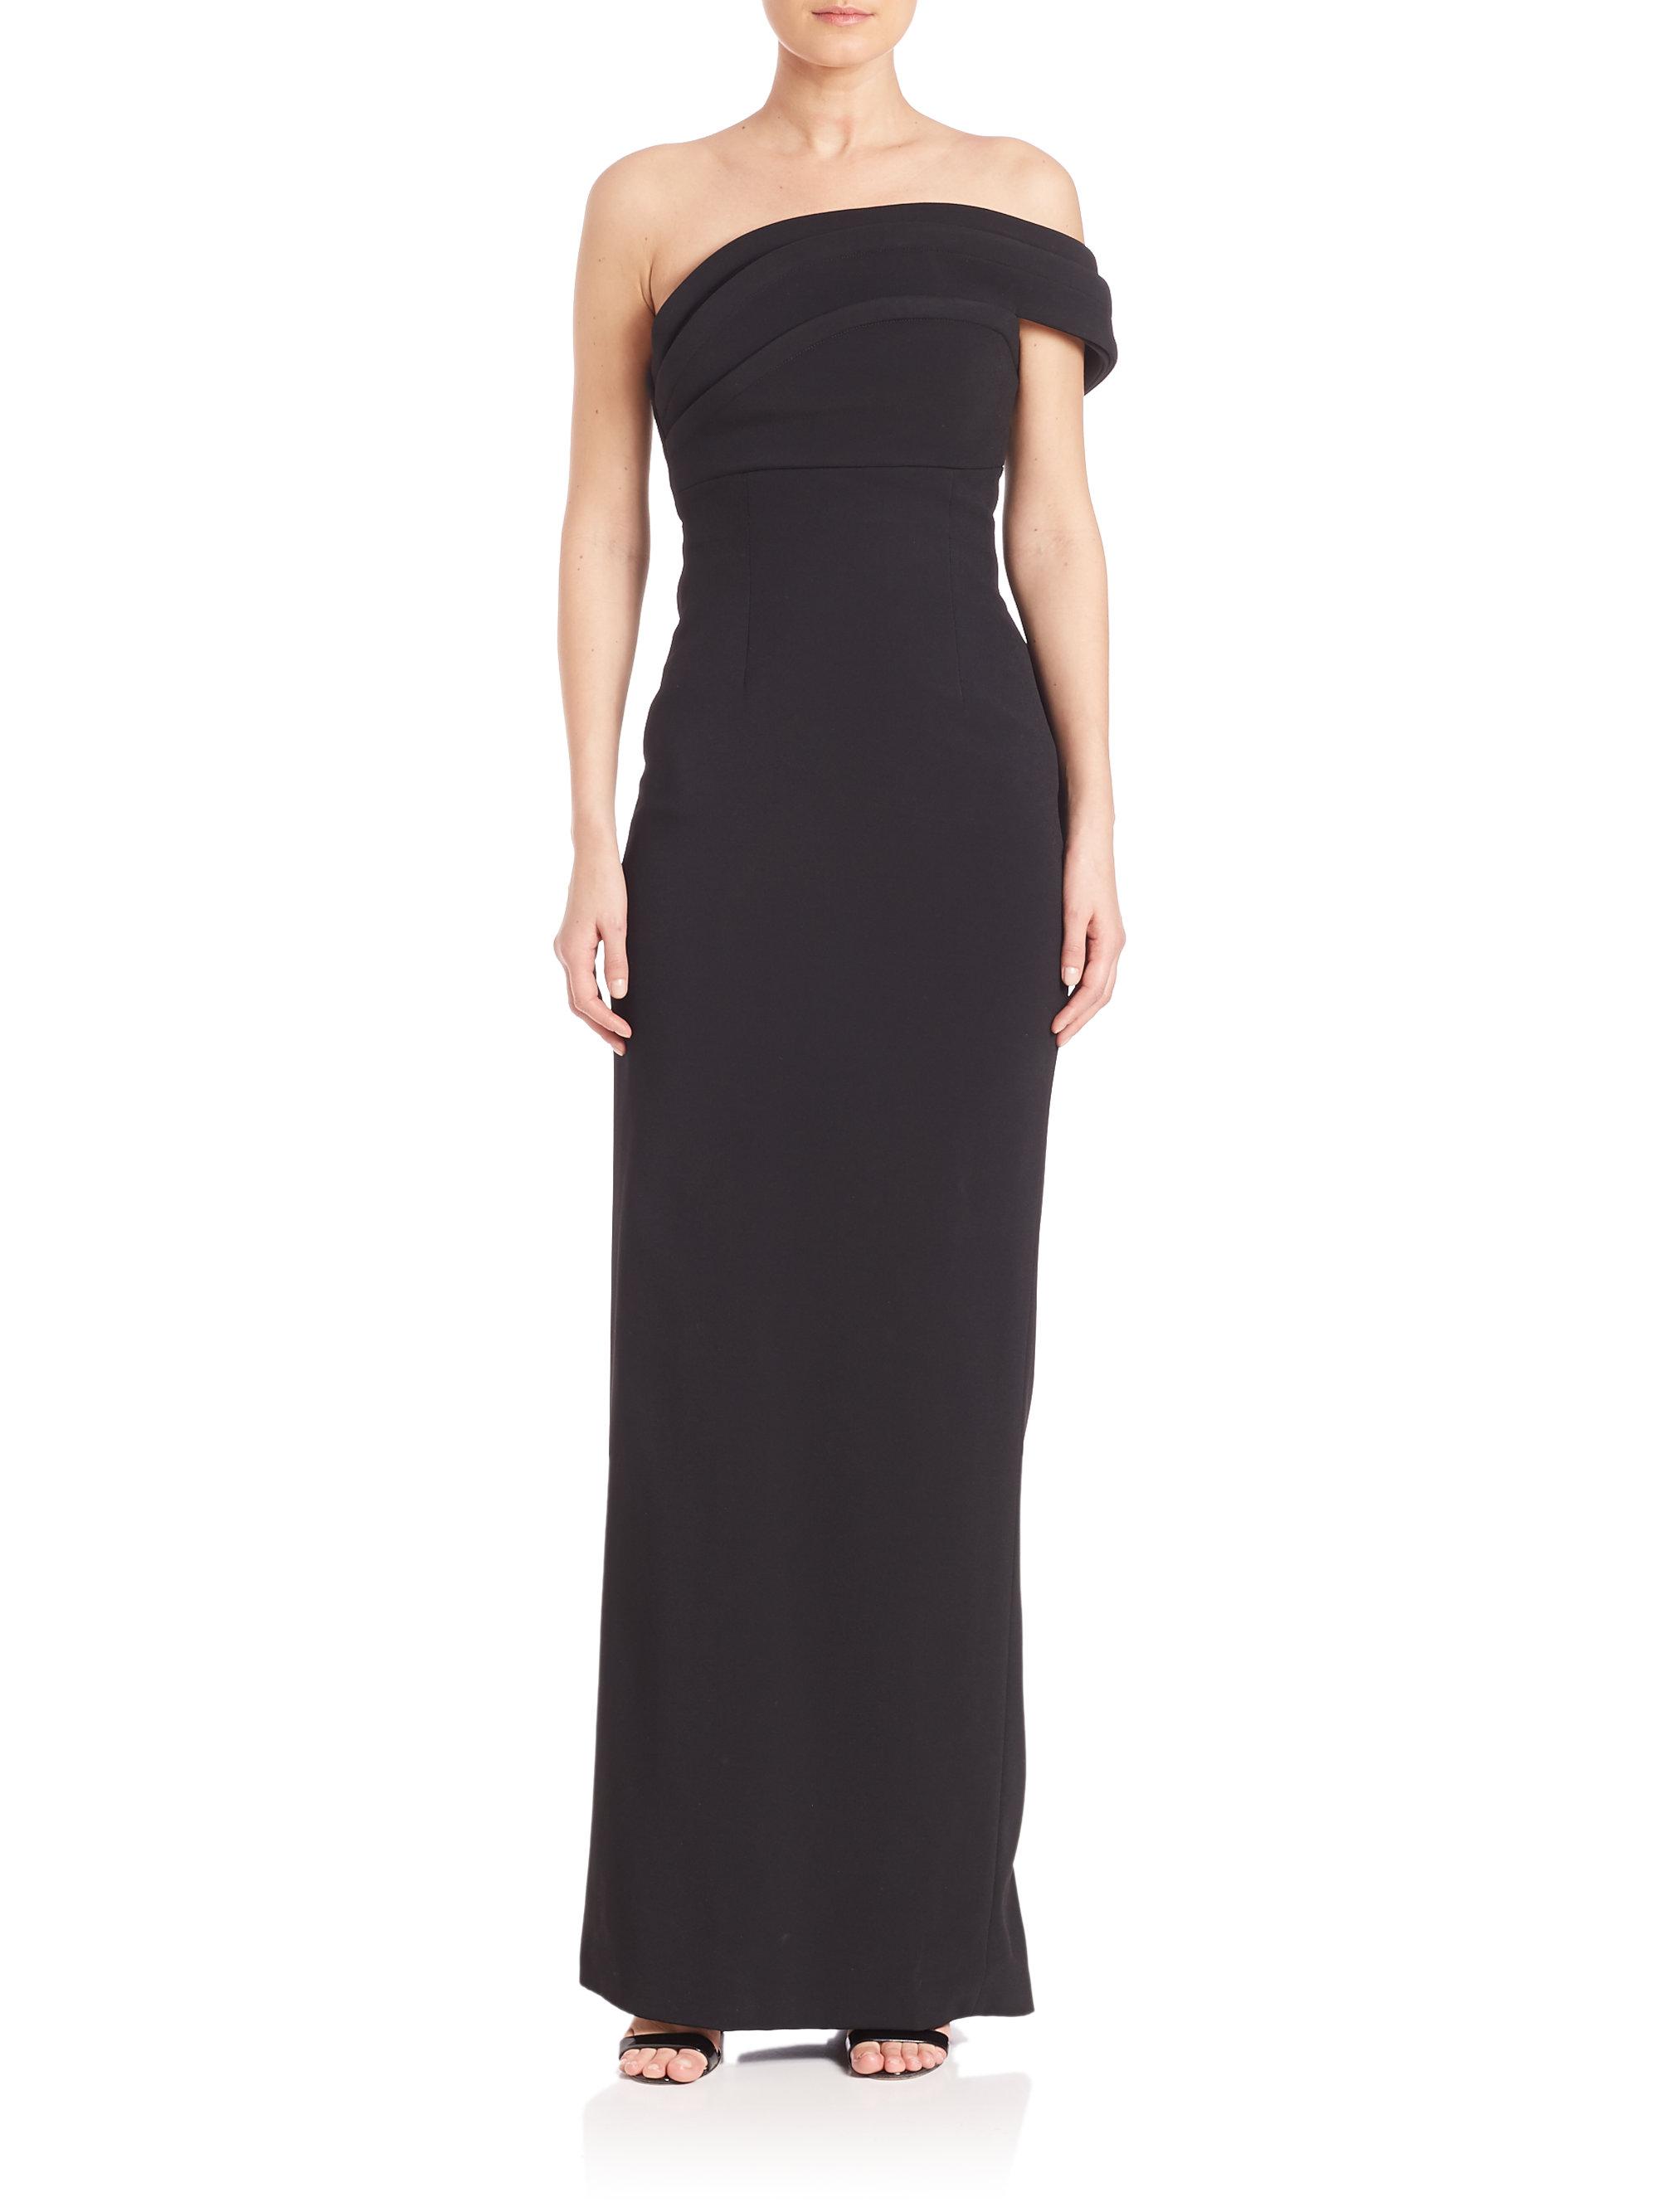 Brandon Maxwell Back-ruffle Off-the-shoulder Gown in Black - Lyst